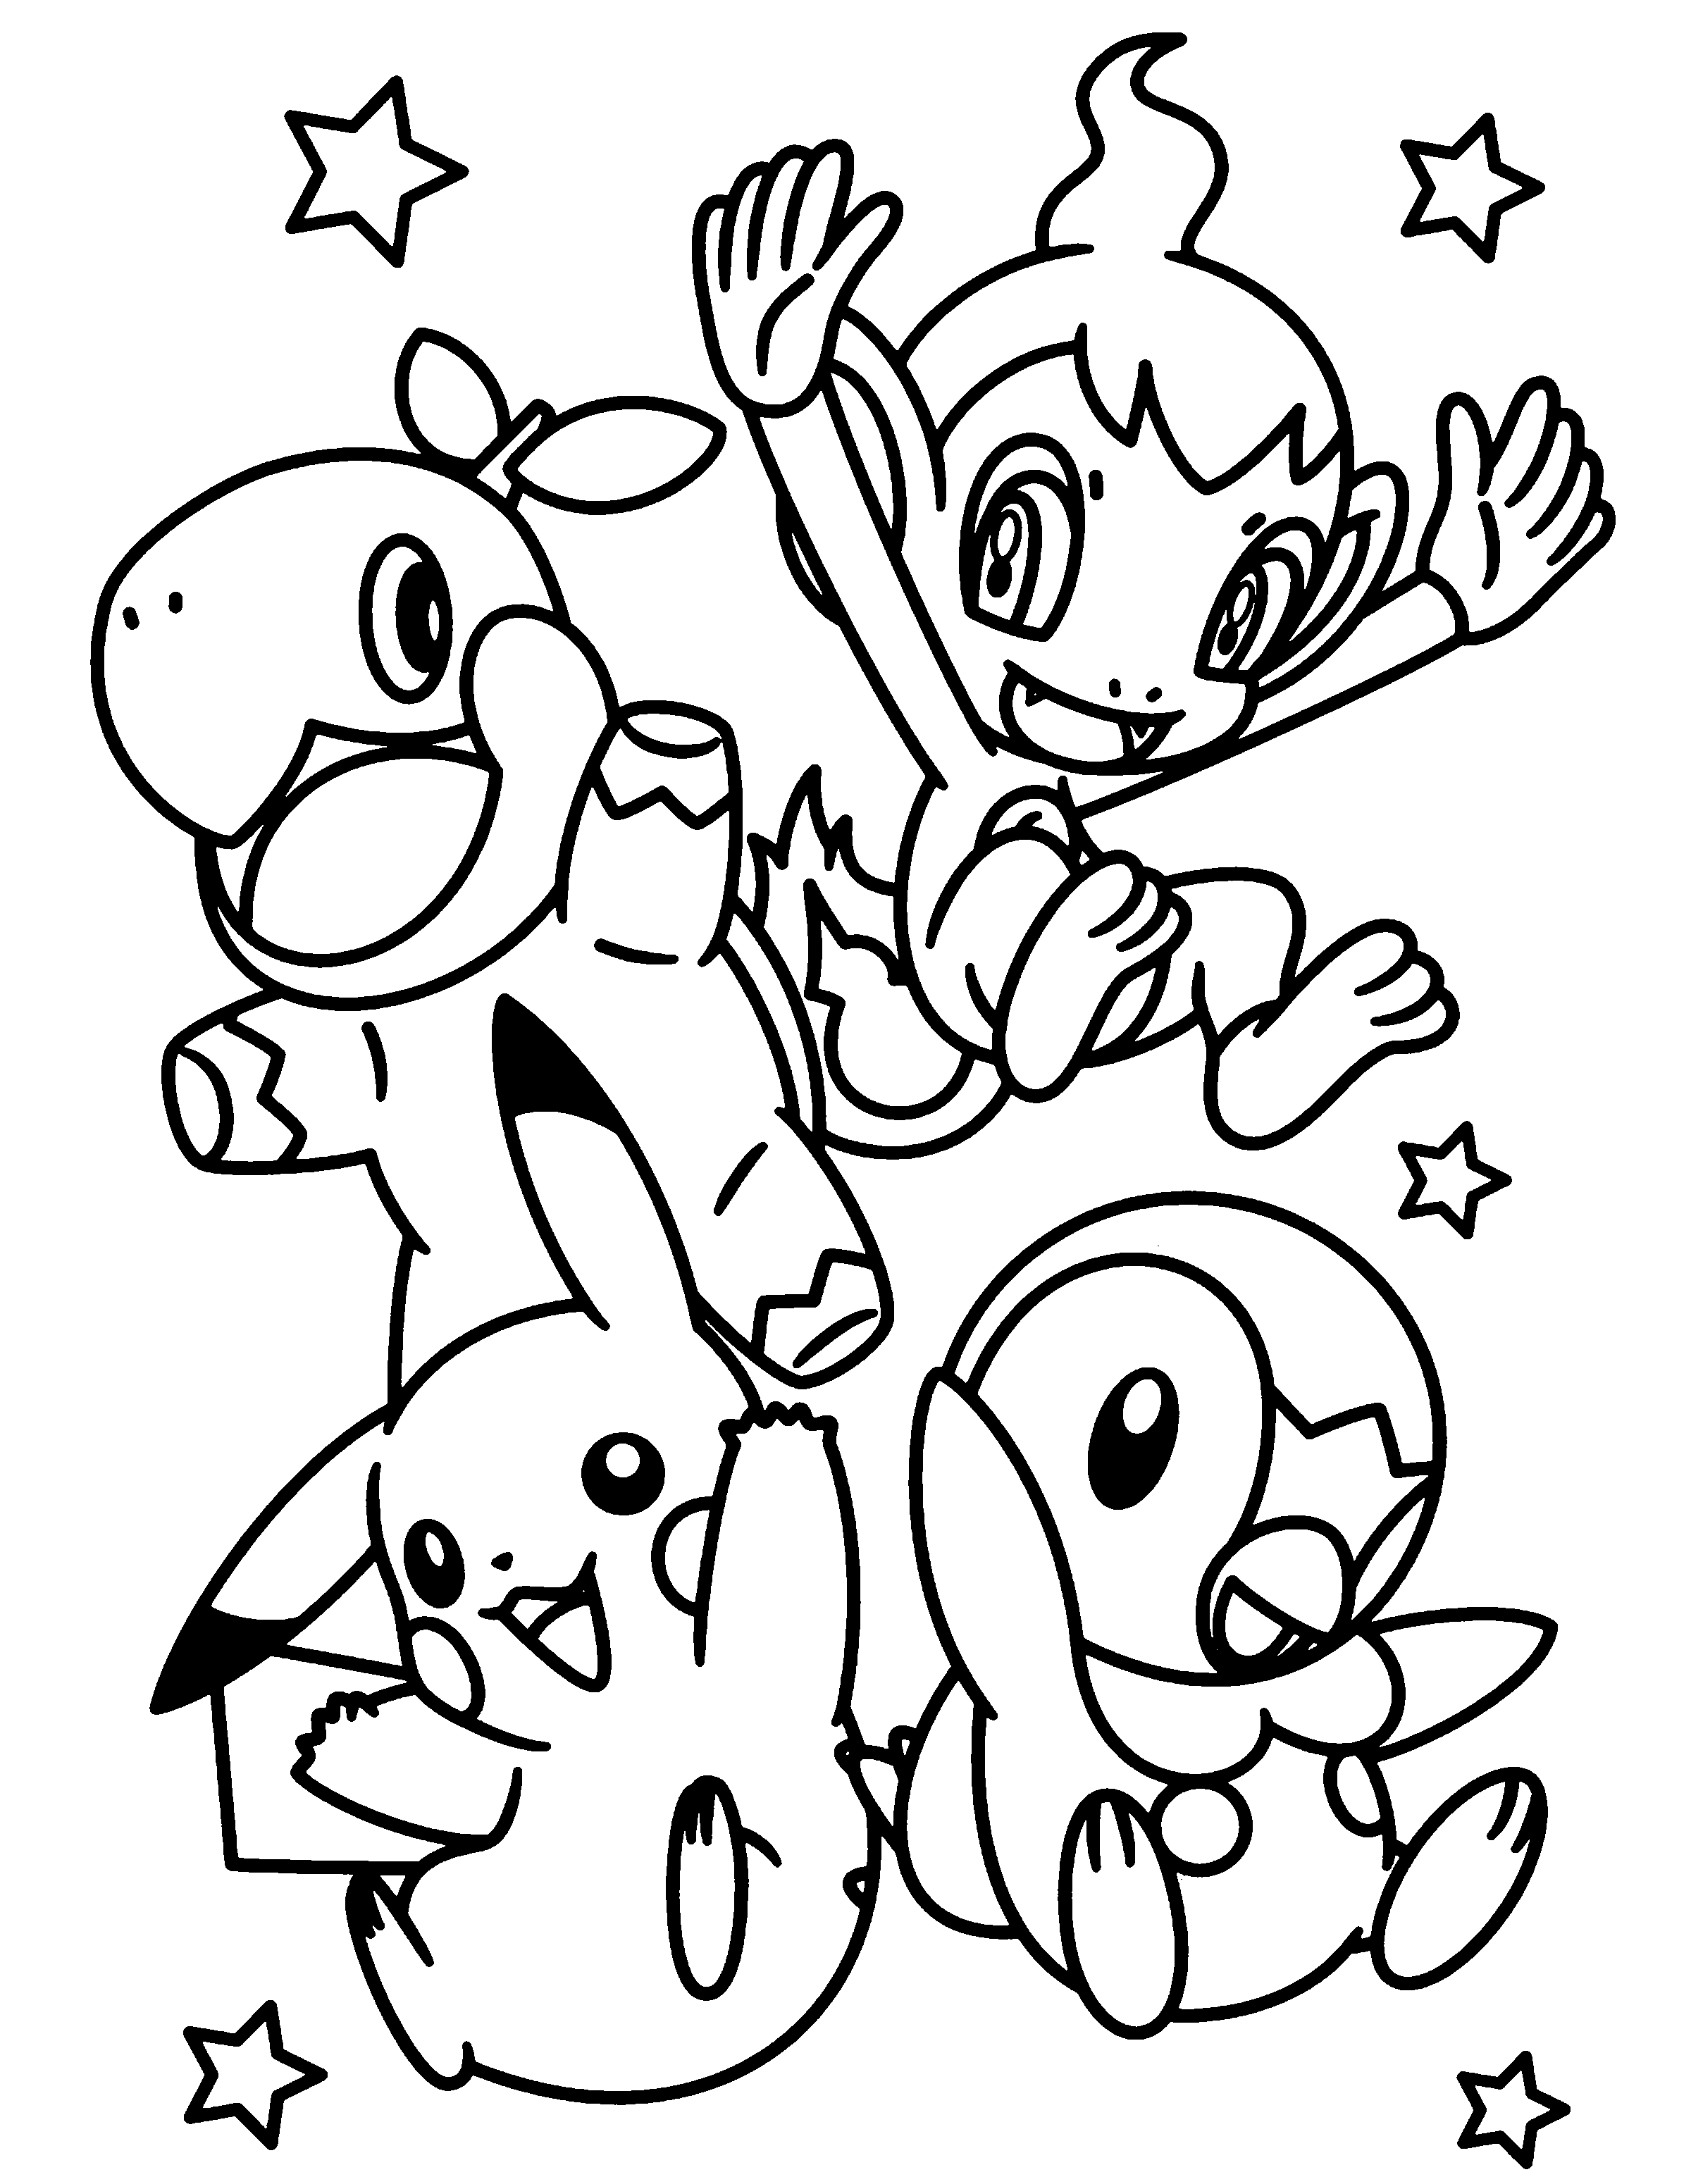 Piplup Coloring Page.